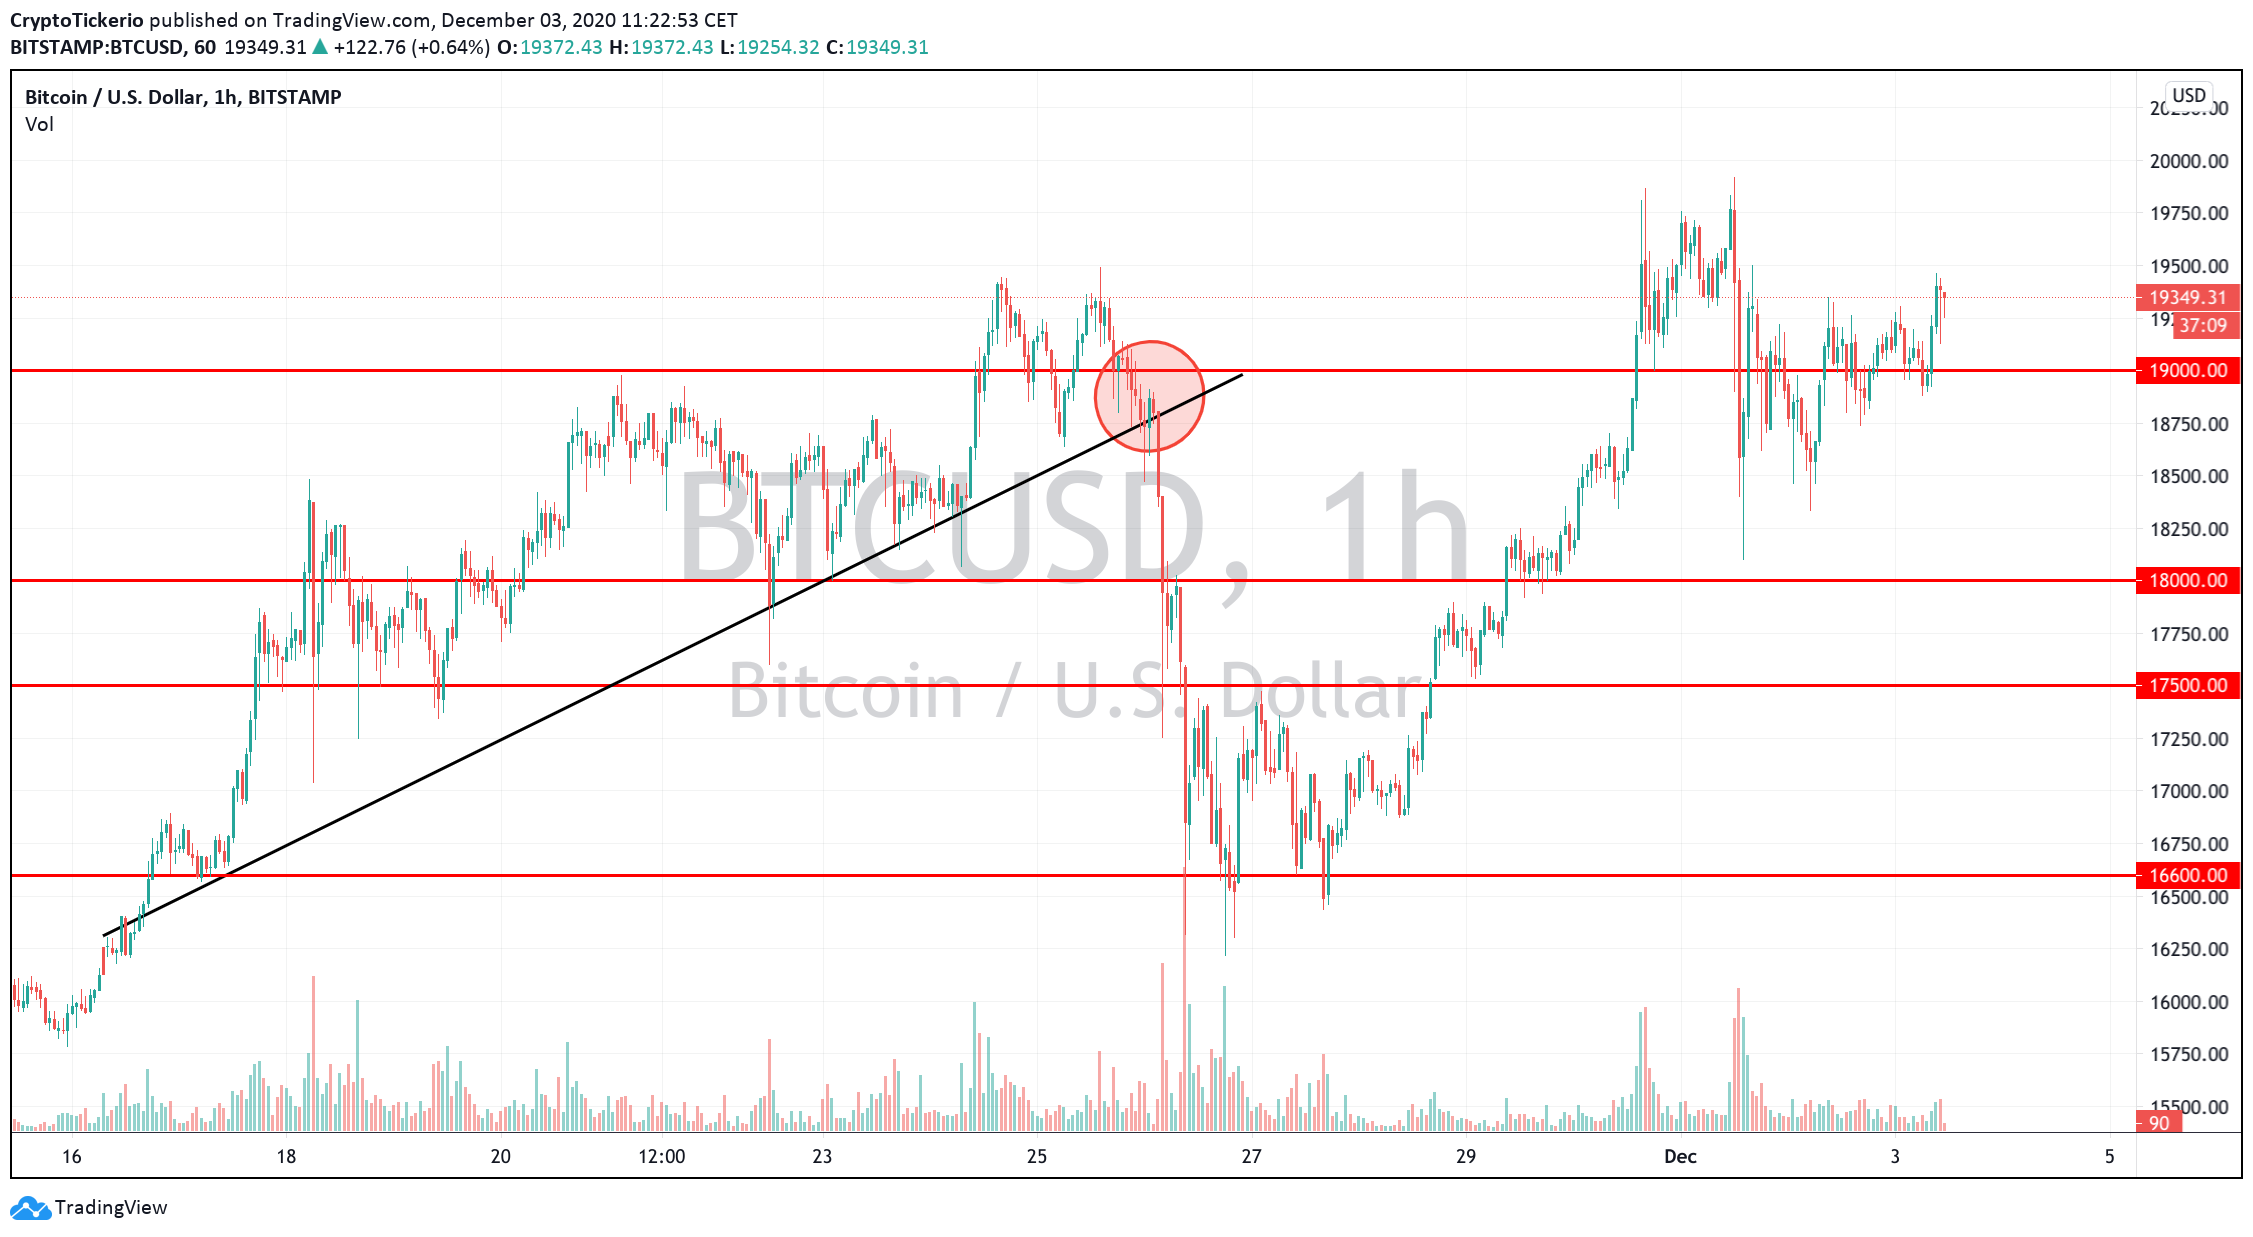 BTC/USD 1-Hour chart showing higher highs 